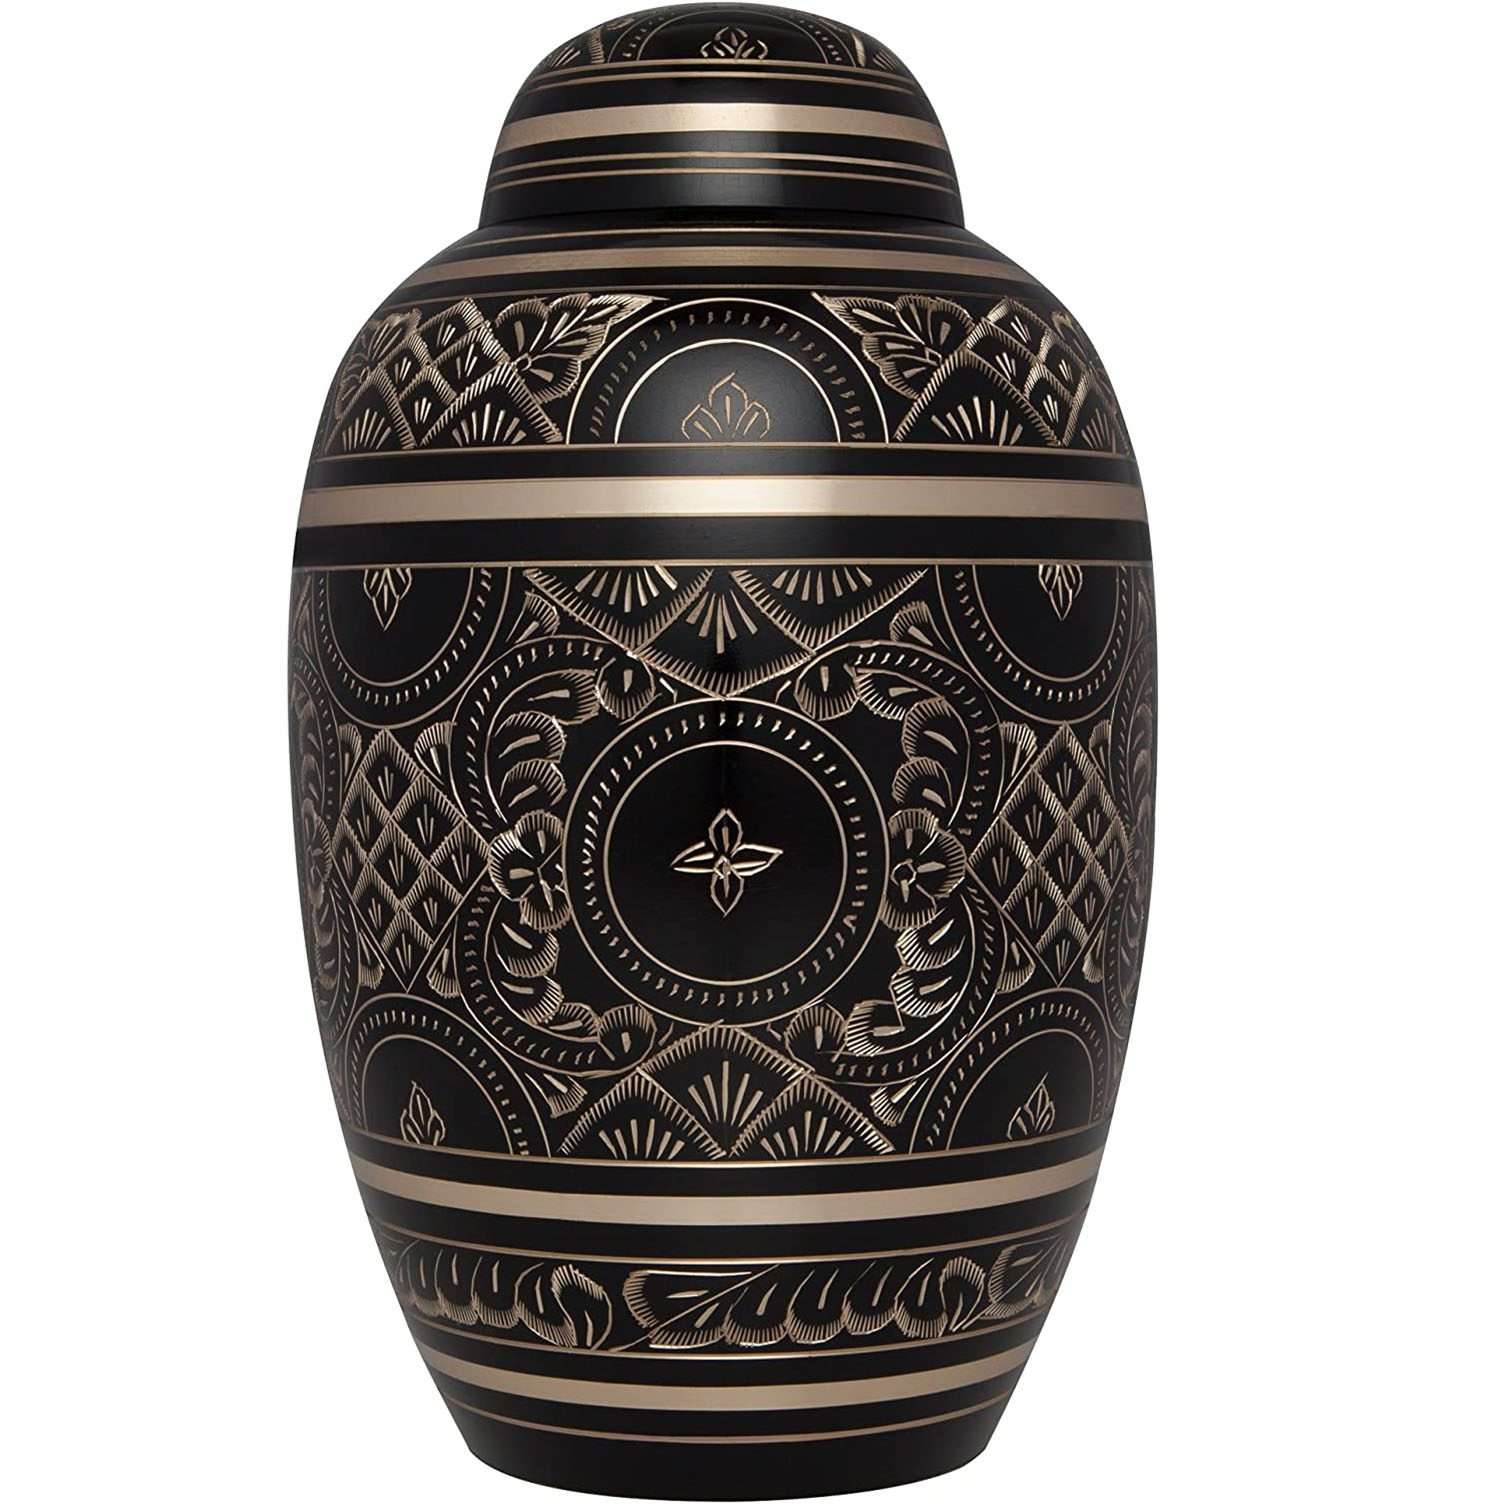 Handcrafted Black Cremation Urn for Human Ashes with Gold Engraving | Brass Cremation Urn